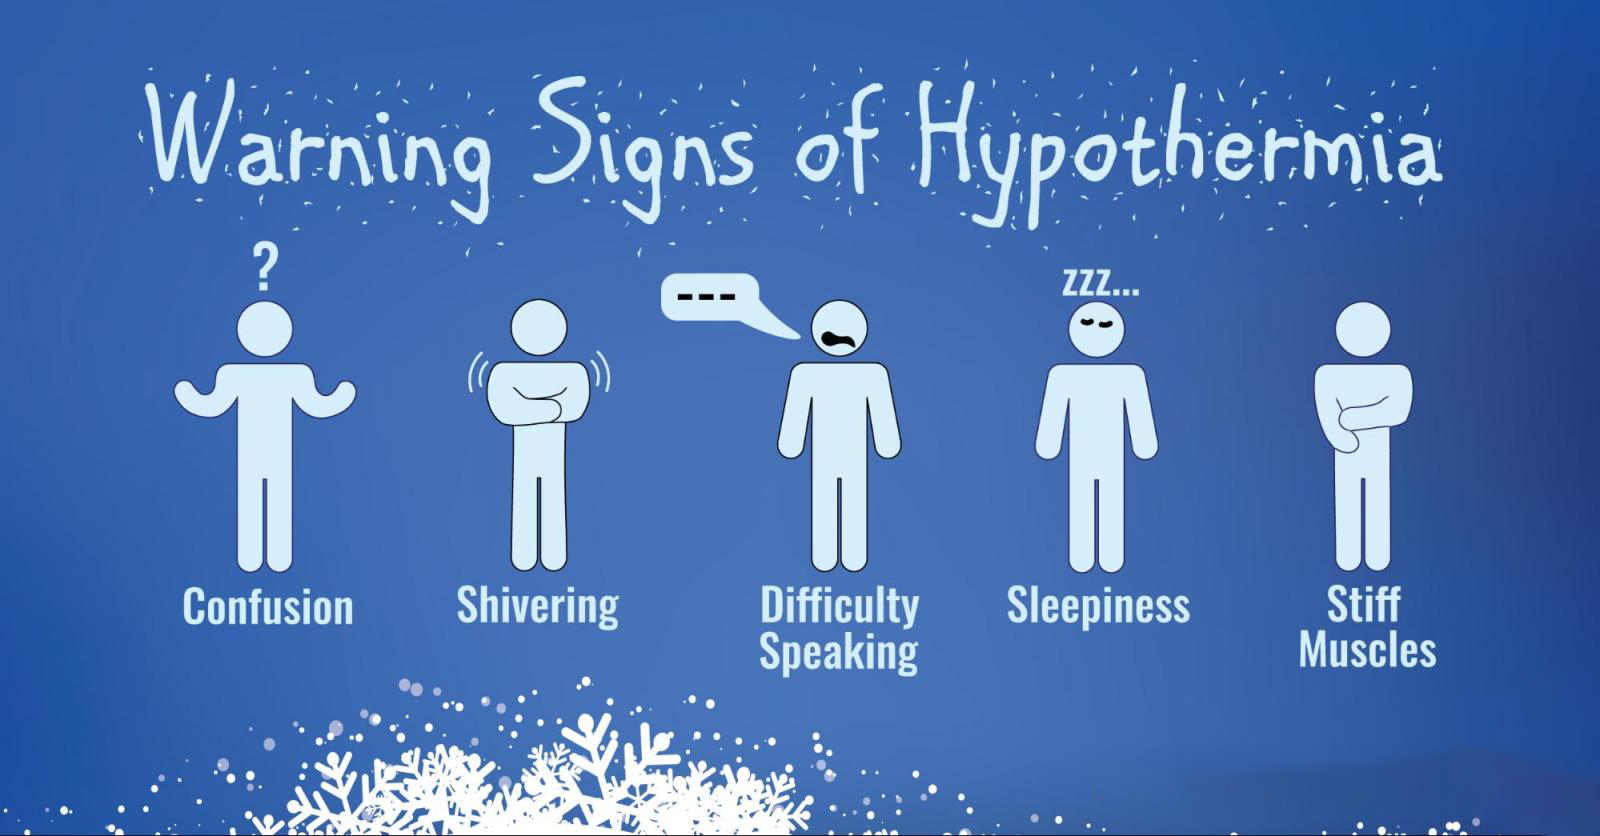 Know the Warning Signs of Hypothermia.